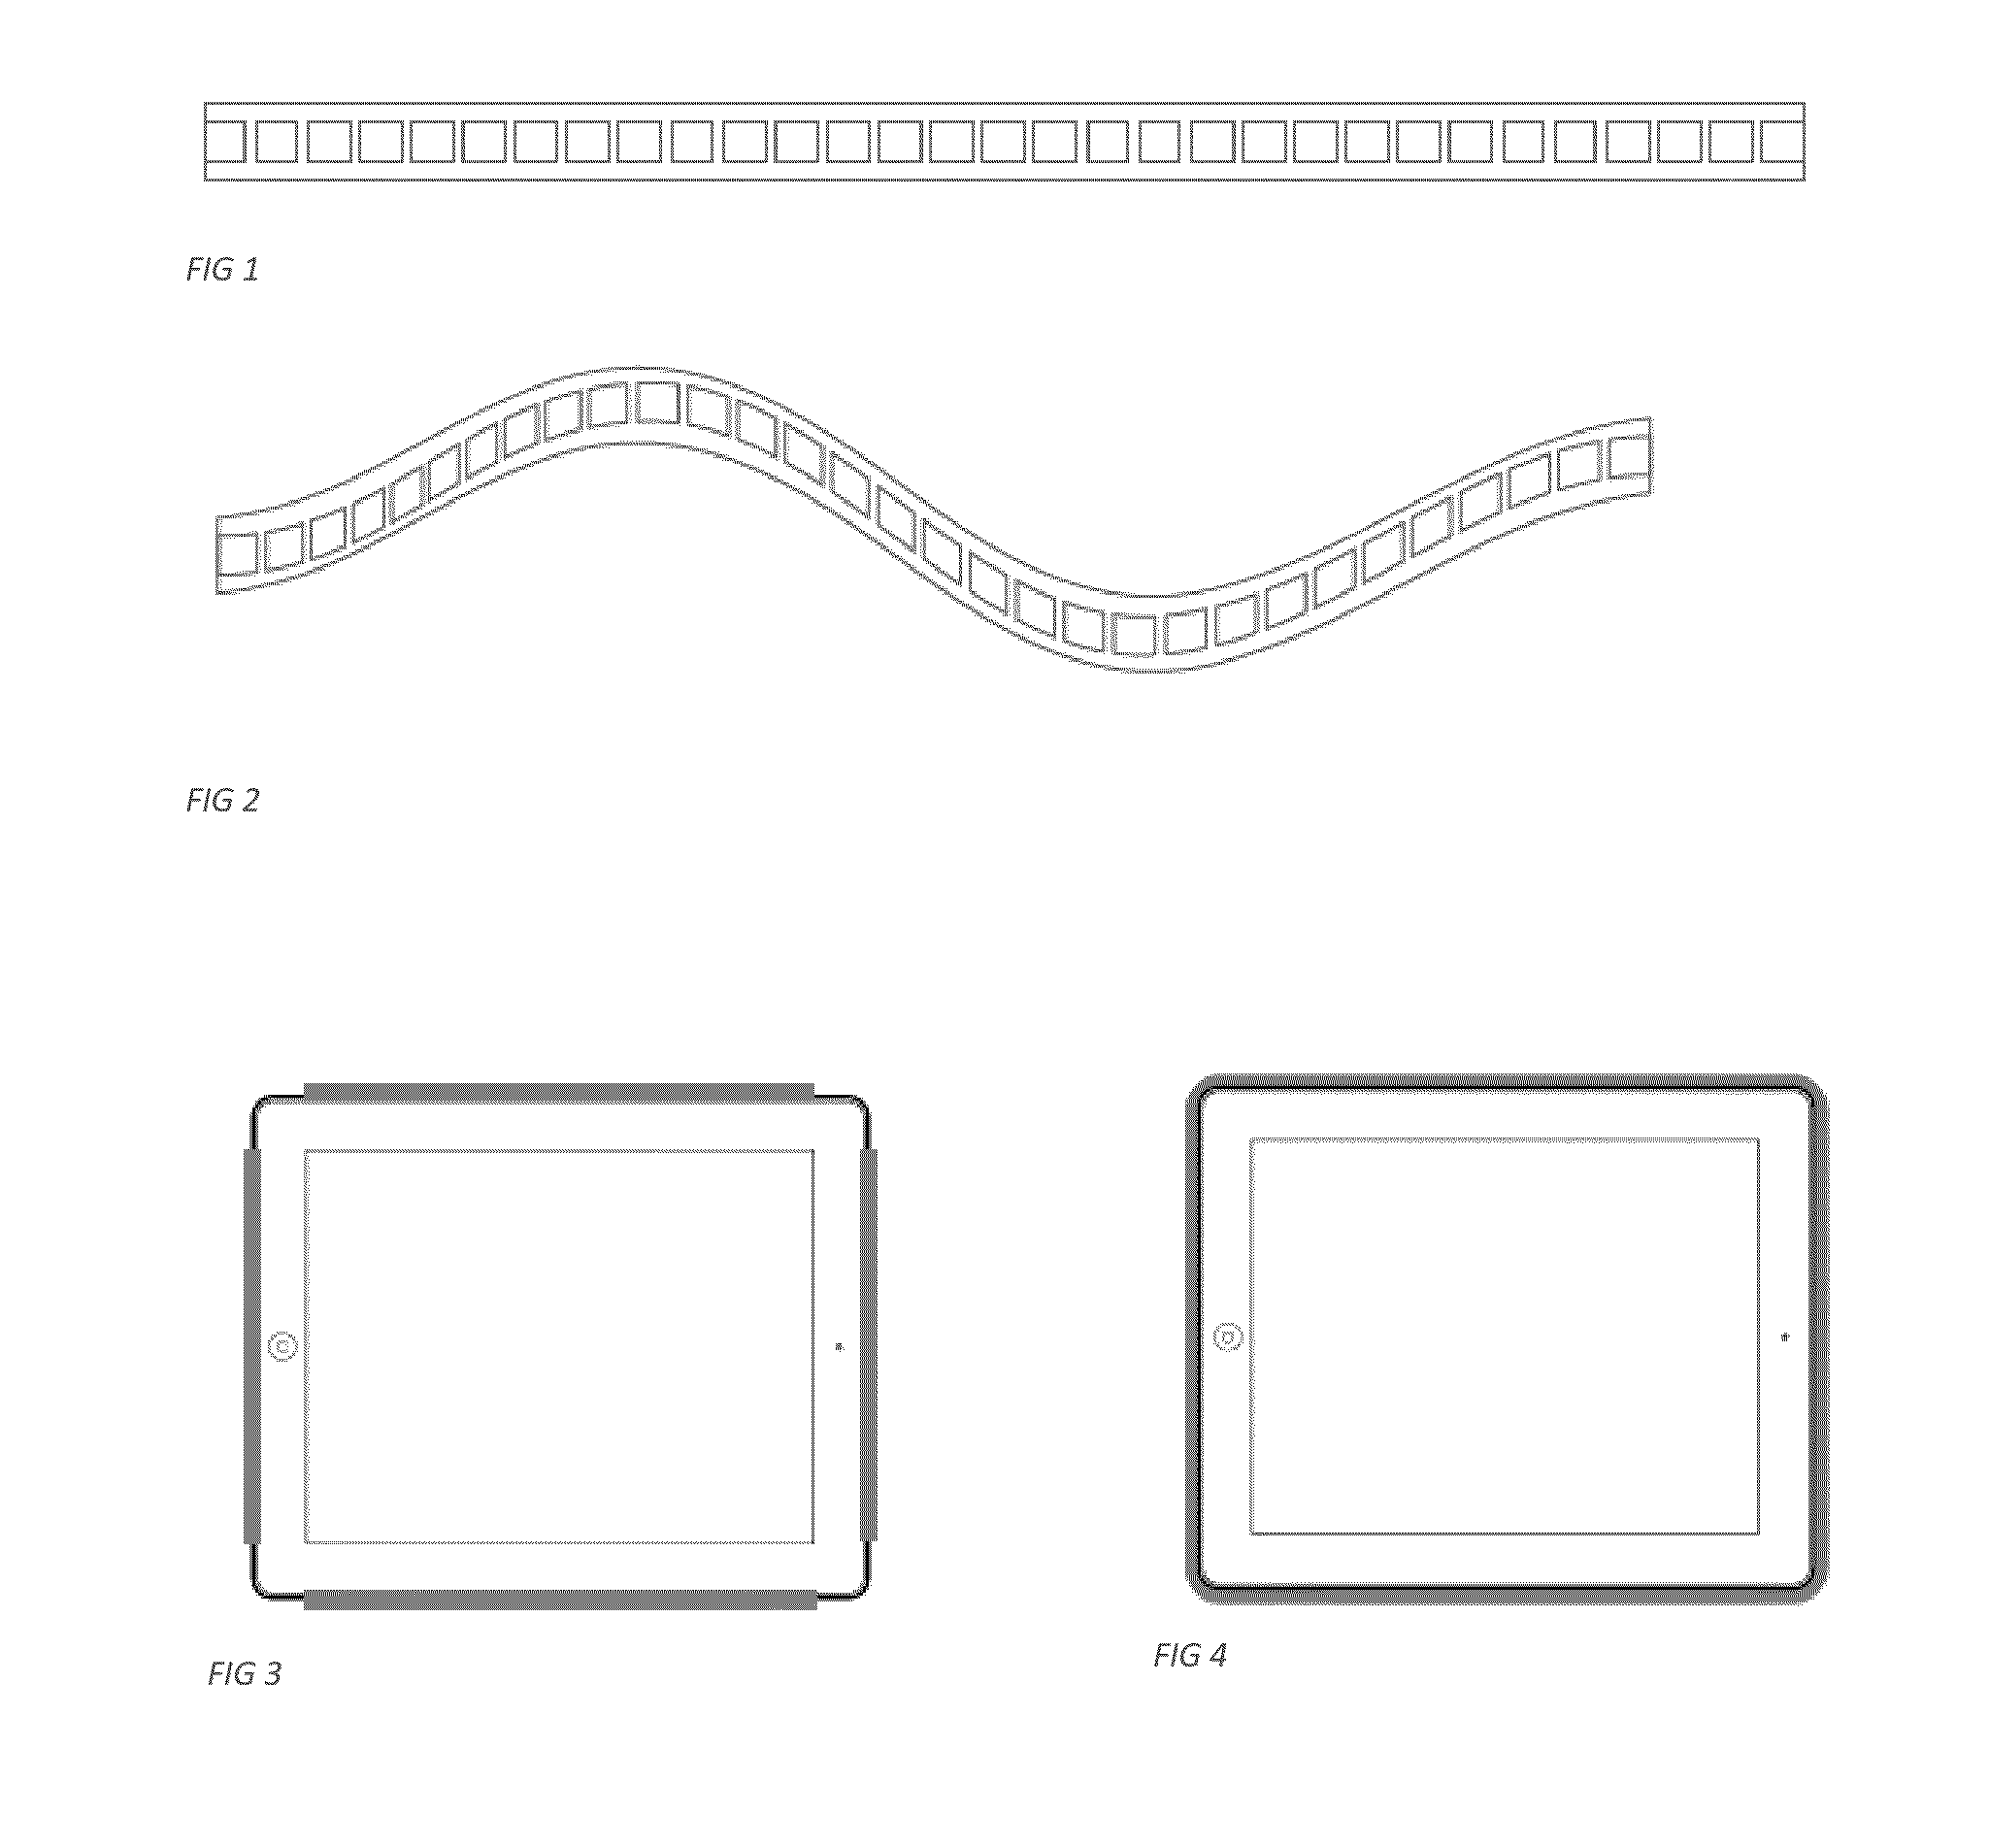 Touch sensitive edge input device for computing devices